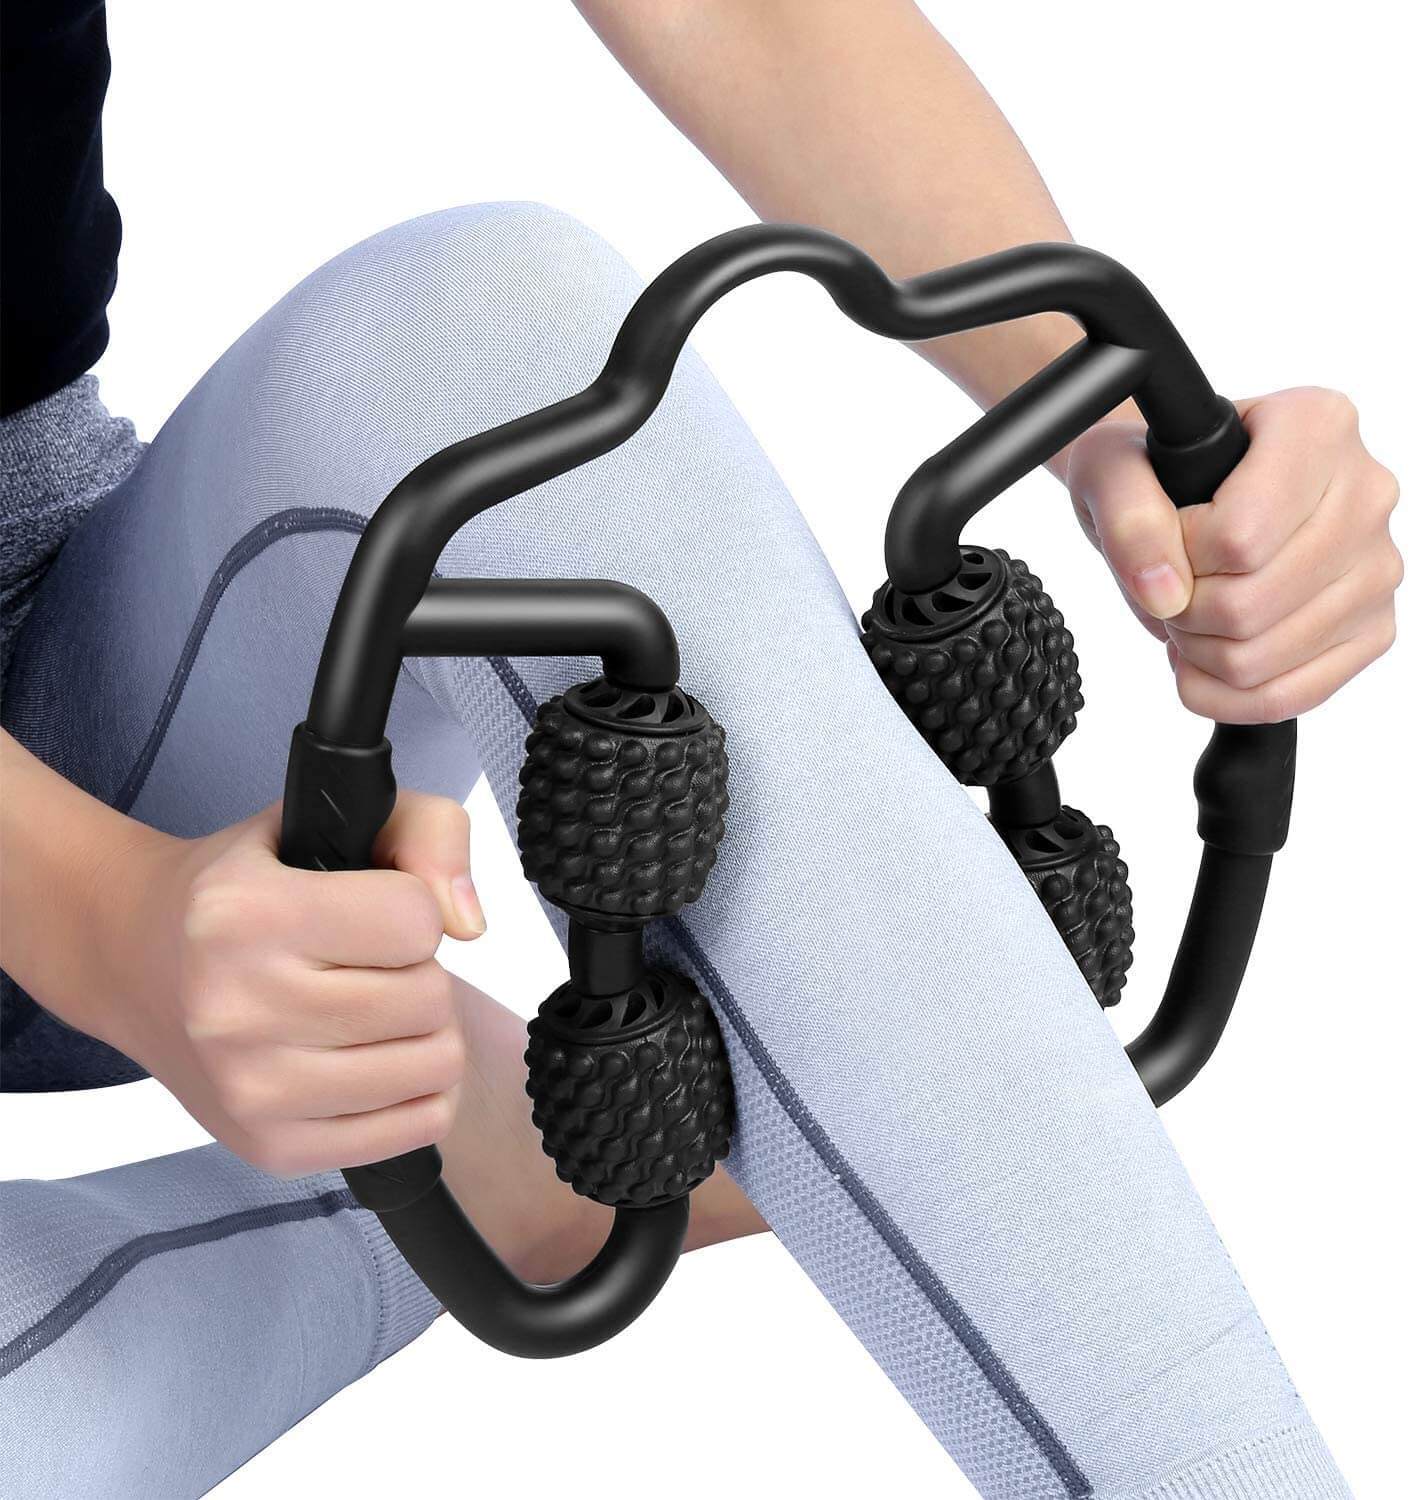 Rollexo™ Anti-Cellulite and Pain Relief Massager